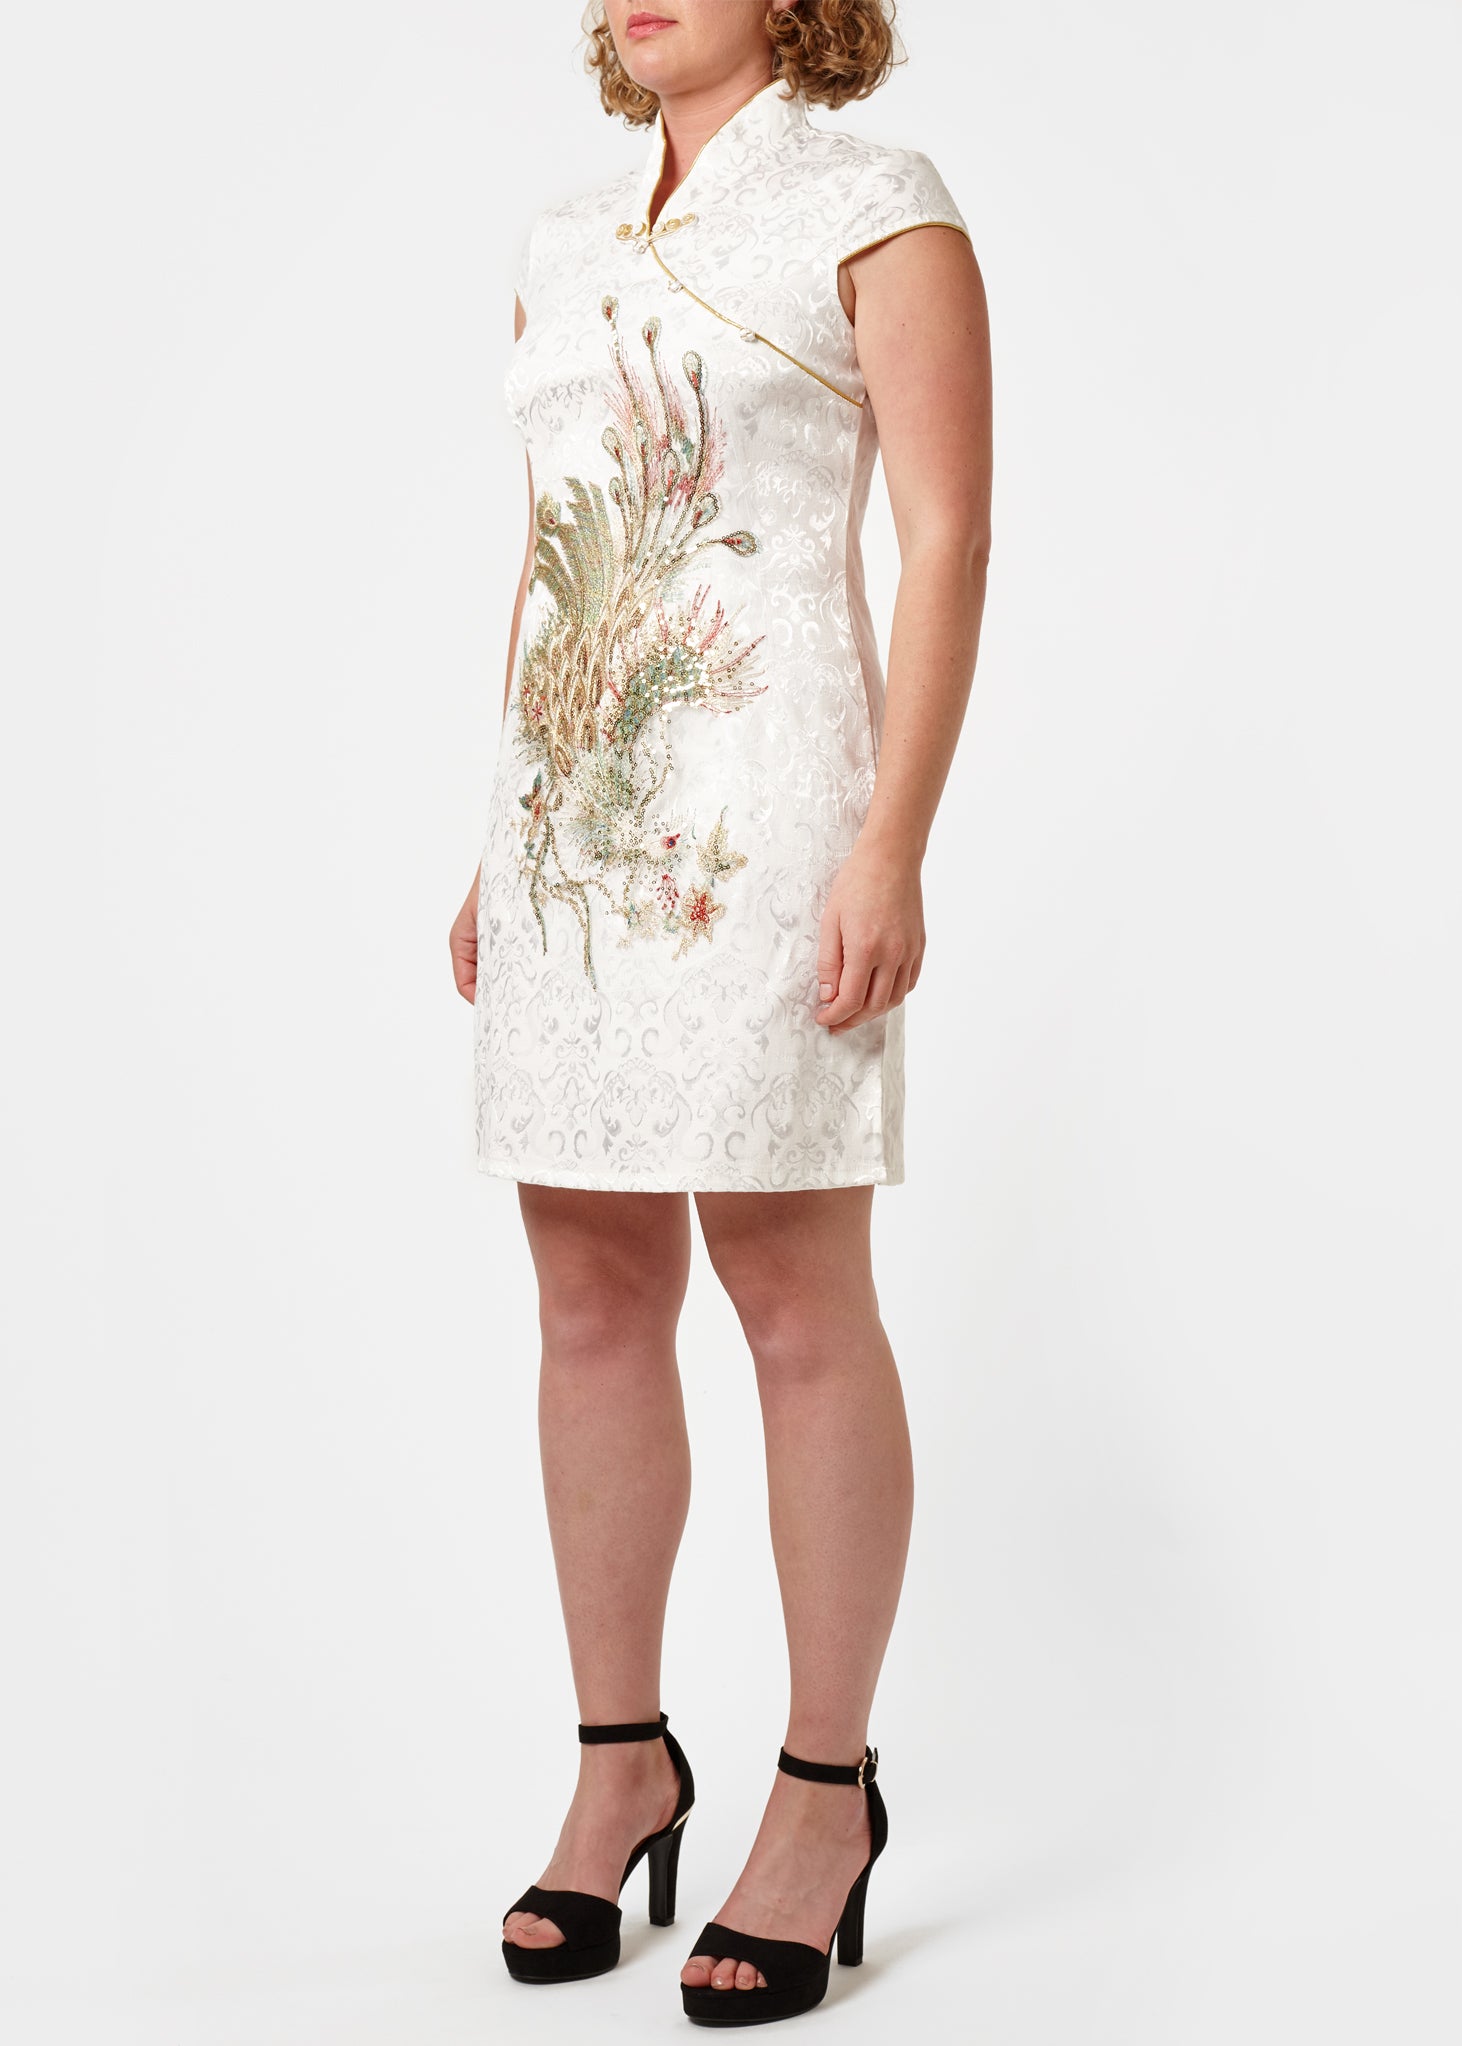 The Cheongsam or Qipao, is a feminine body-hugging dress with distinctive Chinese features of mandarin collar, side splits and hand stitched flower and knot frog fastenings. Manufactured in a classic ivory stretch cotton jacquard with a sequinned, gold embroidered peacock applique and gold piping. Invisible back zip